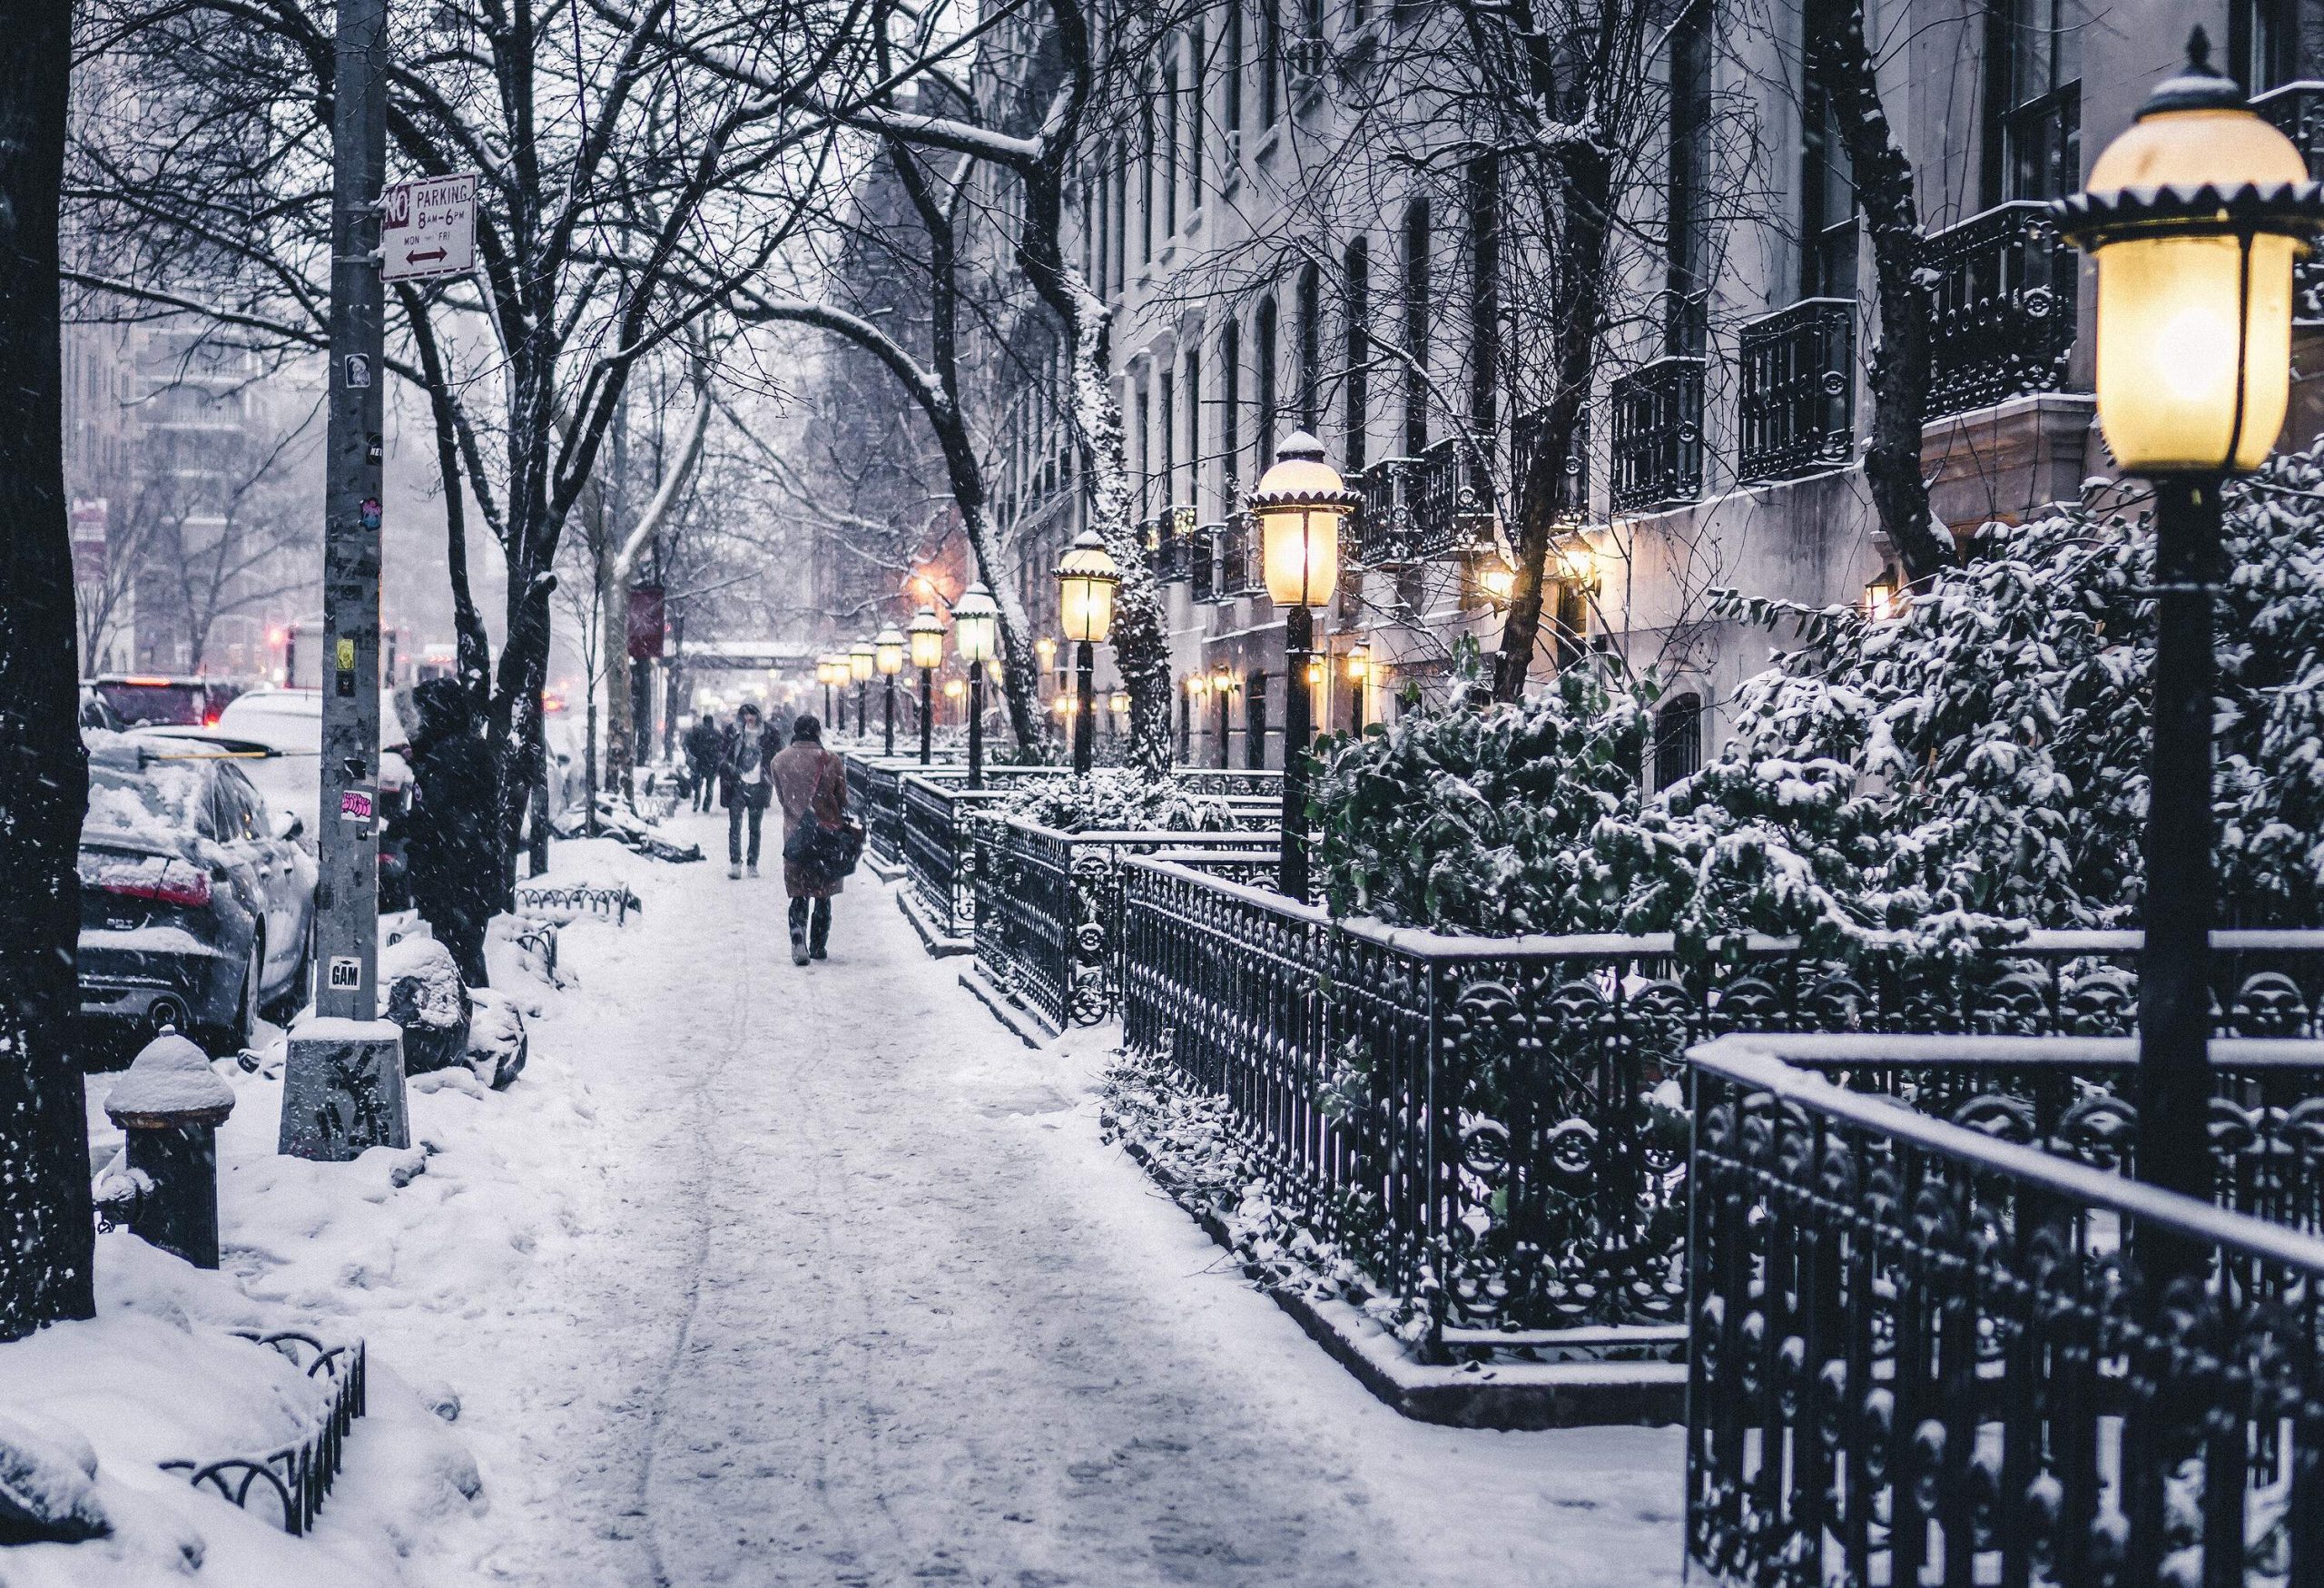 People strolling on a snow-covered sidewalk between parked cars and nearby buildings, bordered by barren trees and lit lamp posts.